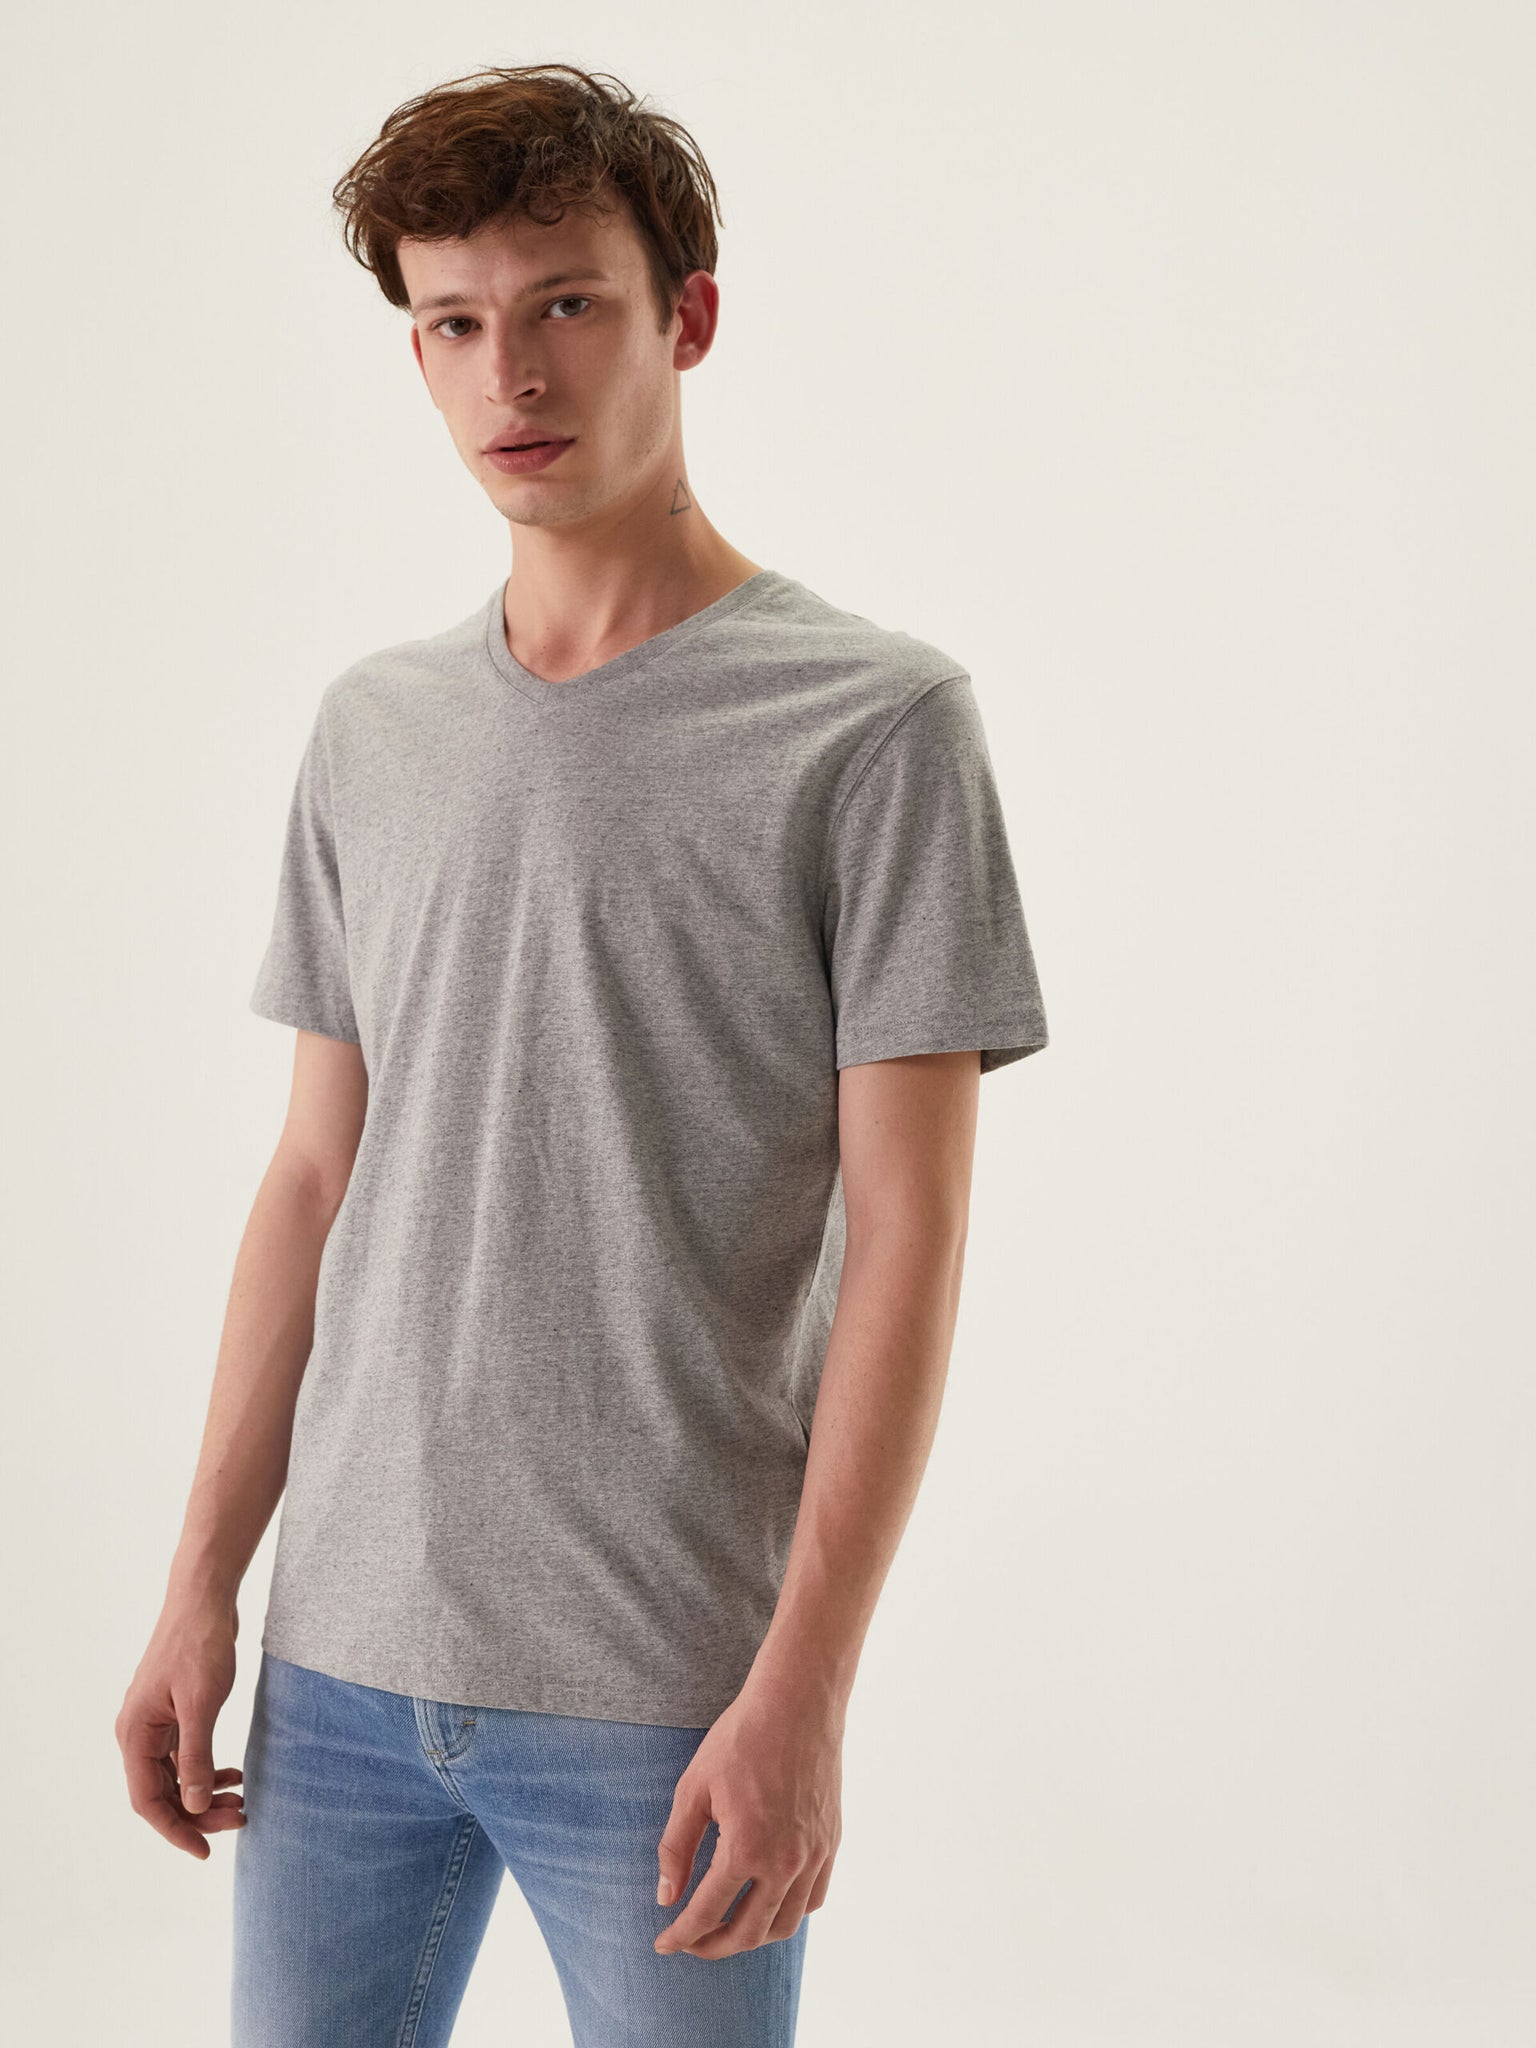 Recycled Cotton V-Neck Tee